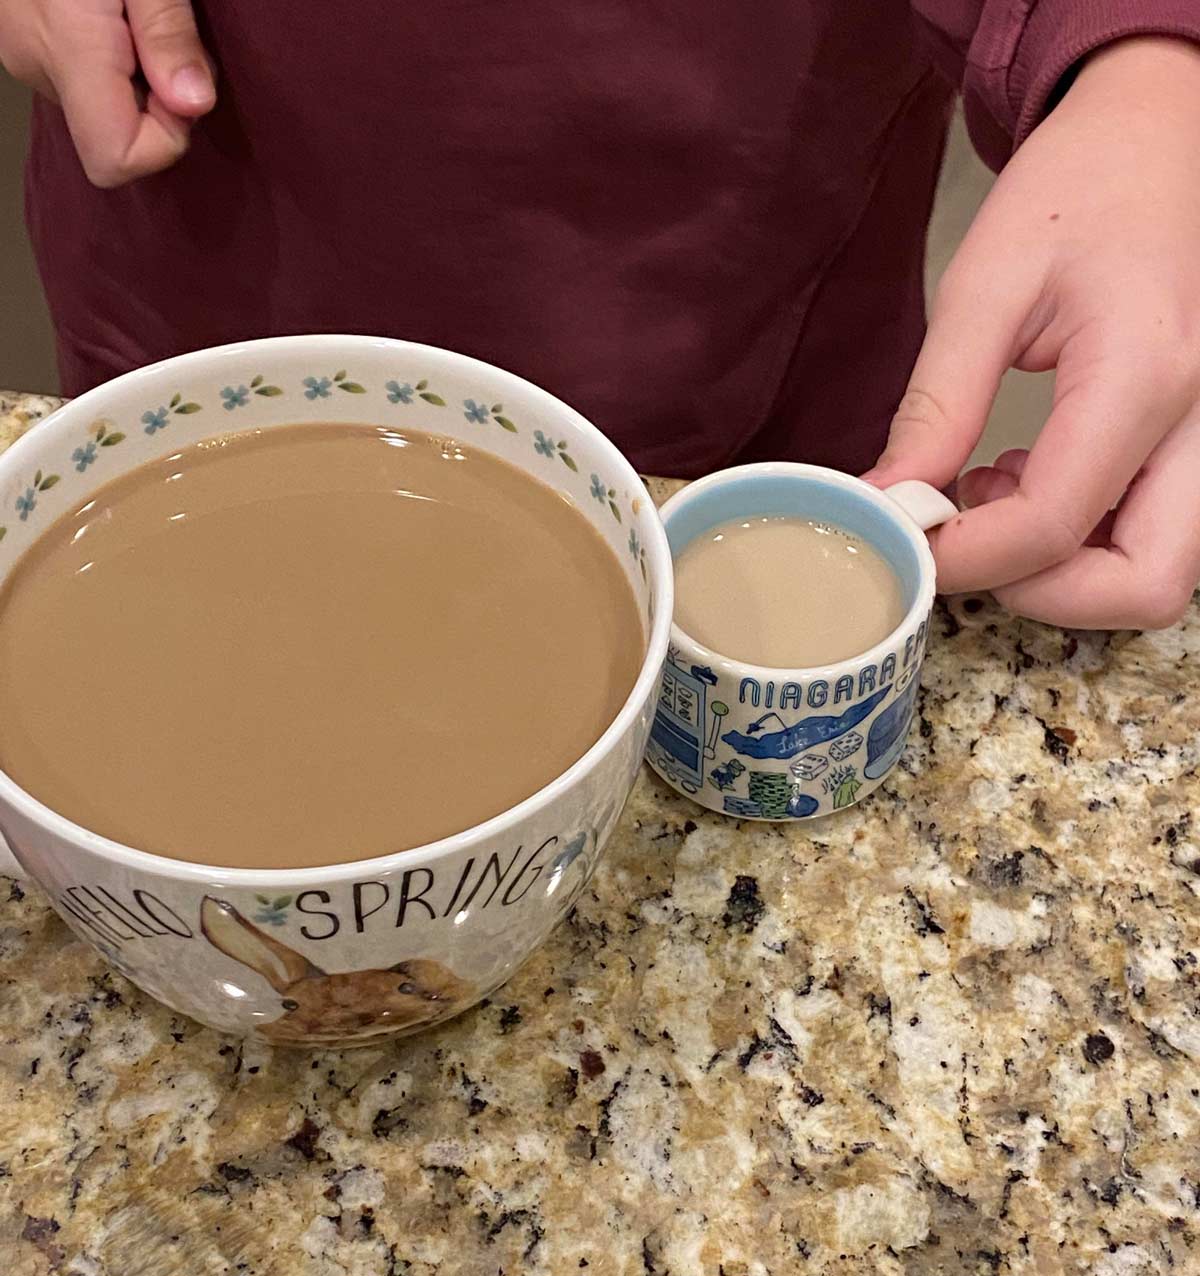 My daughter wanted coffee but she’s 12 so we compromised